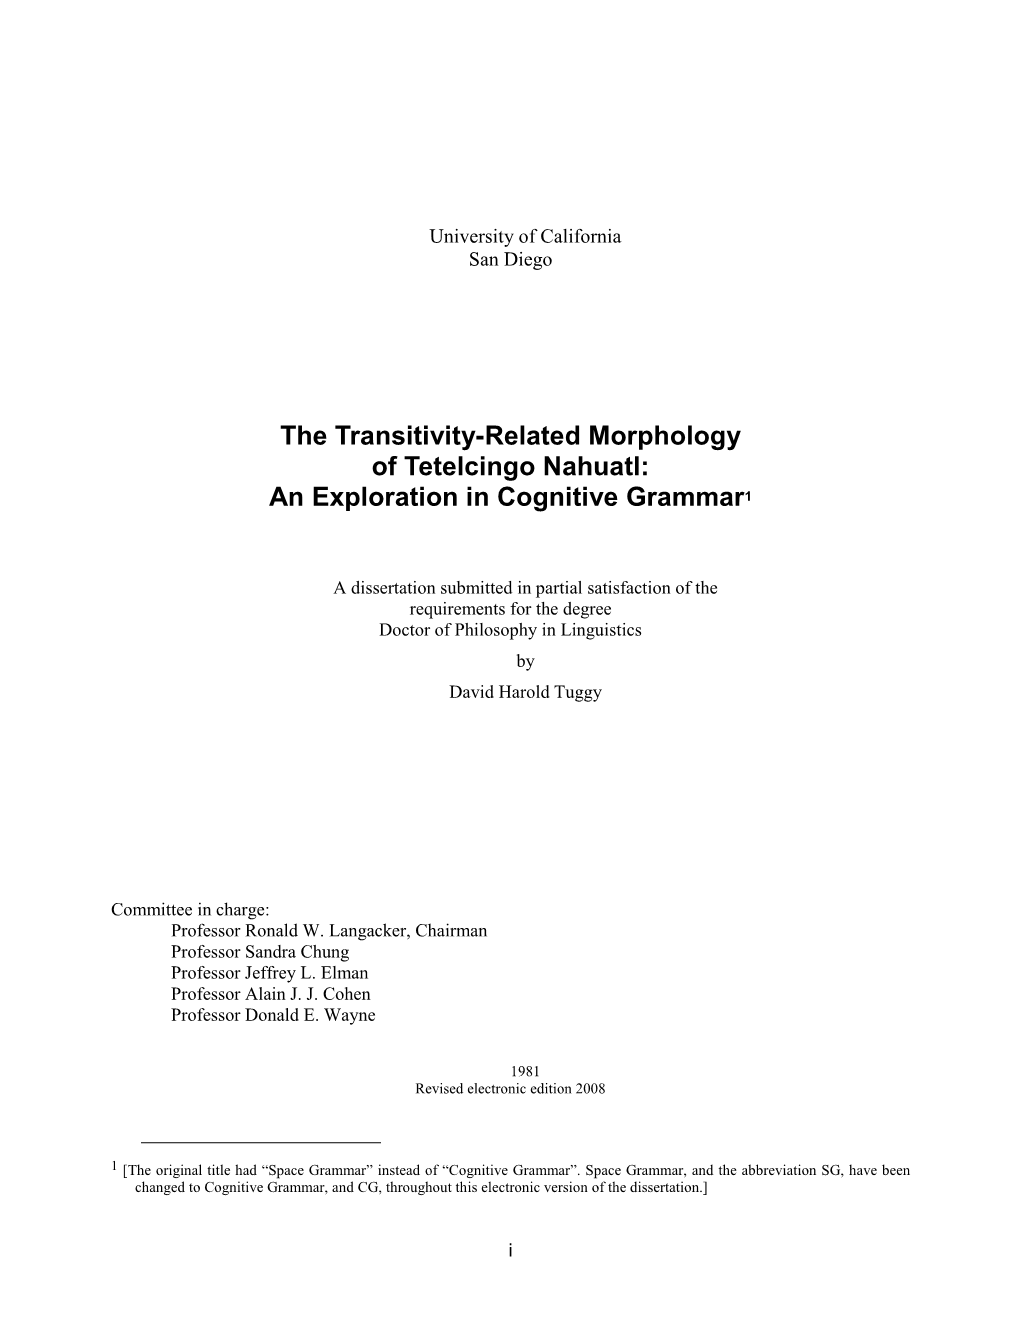 The Transitivity-Related Morphology of Tetelcingo Nahuatl: an Exploration in Cognitive Grammar 1